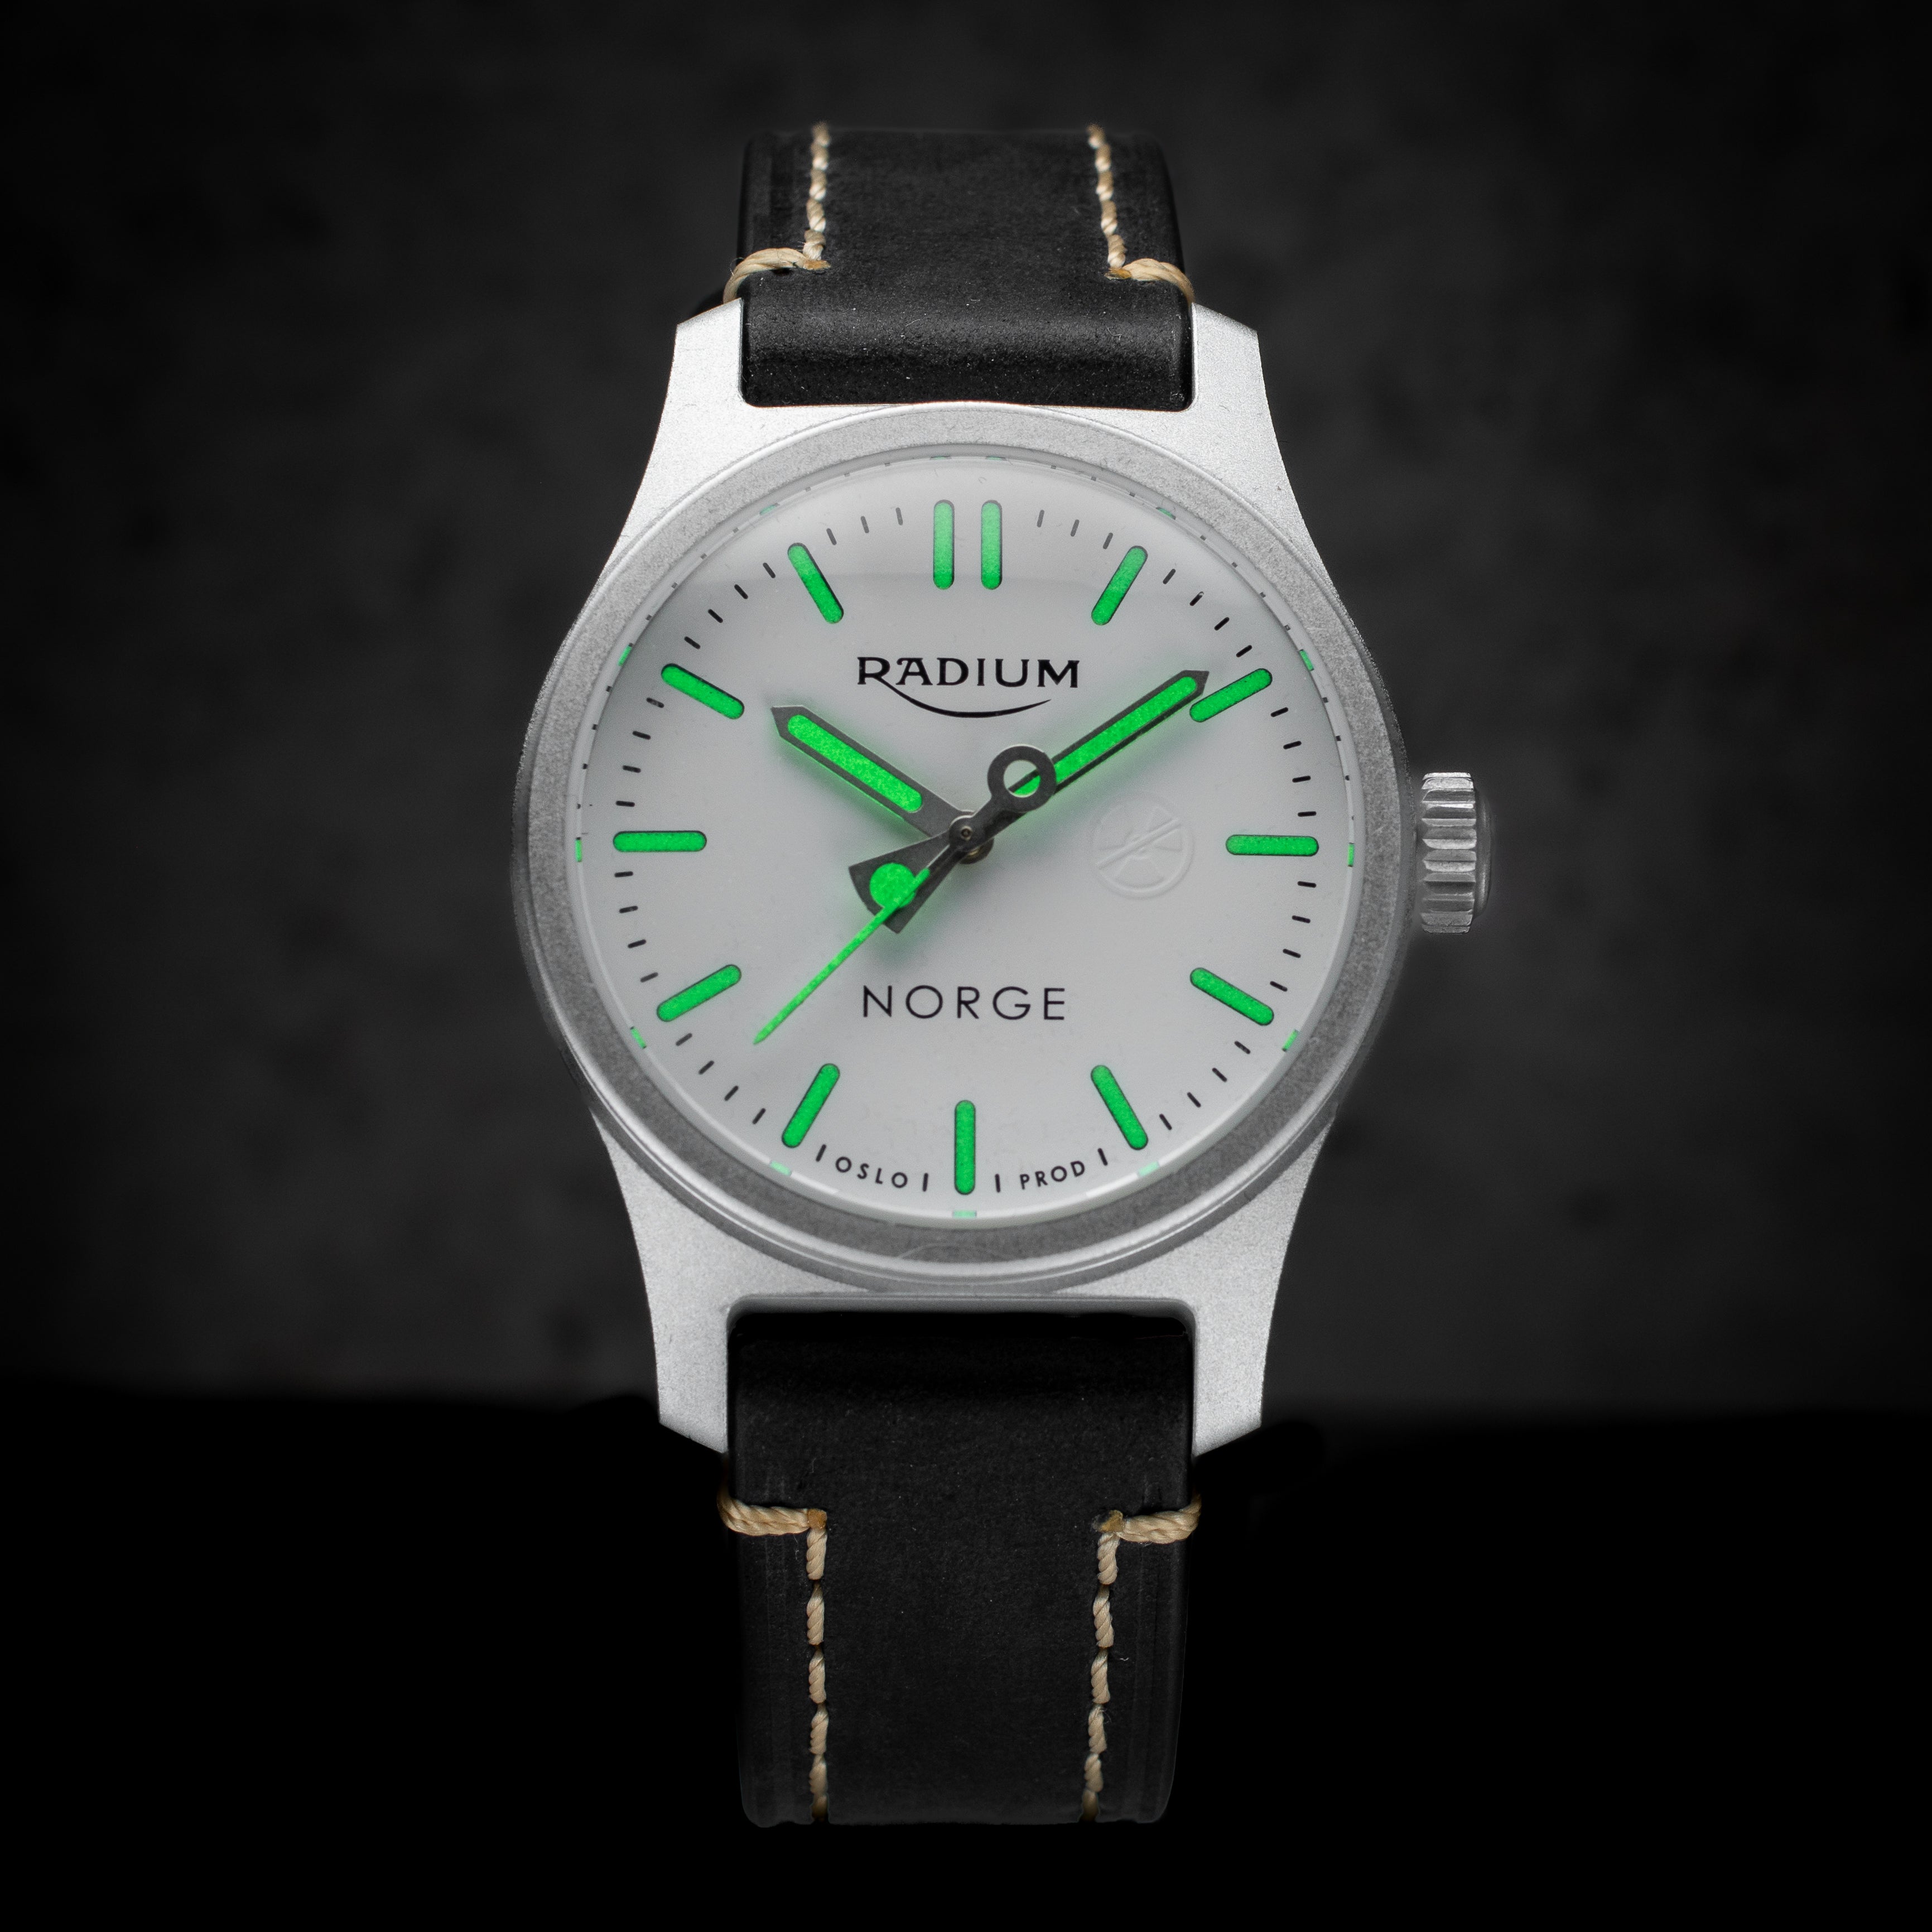 .38 Original Radium: The Iconic Timepiece, Now with Minute Markings